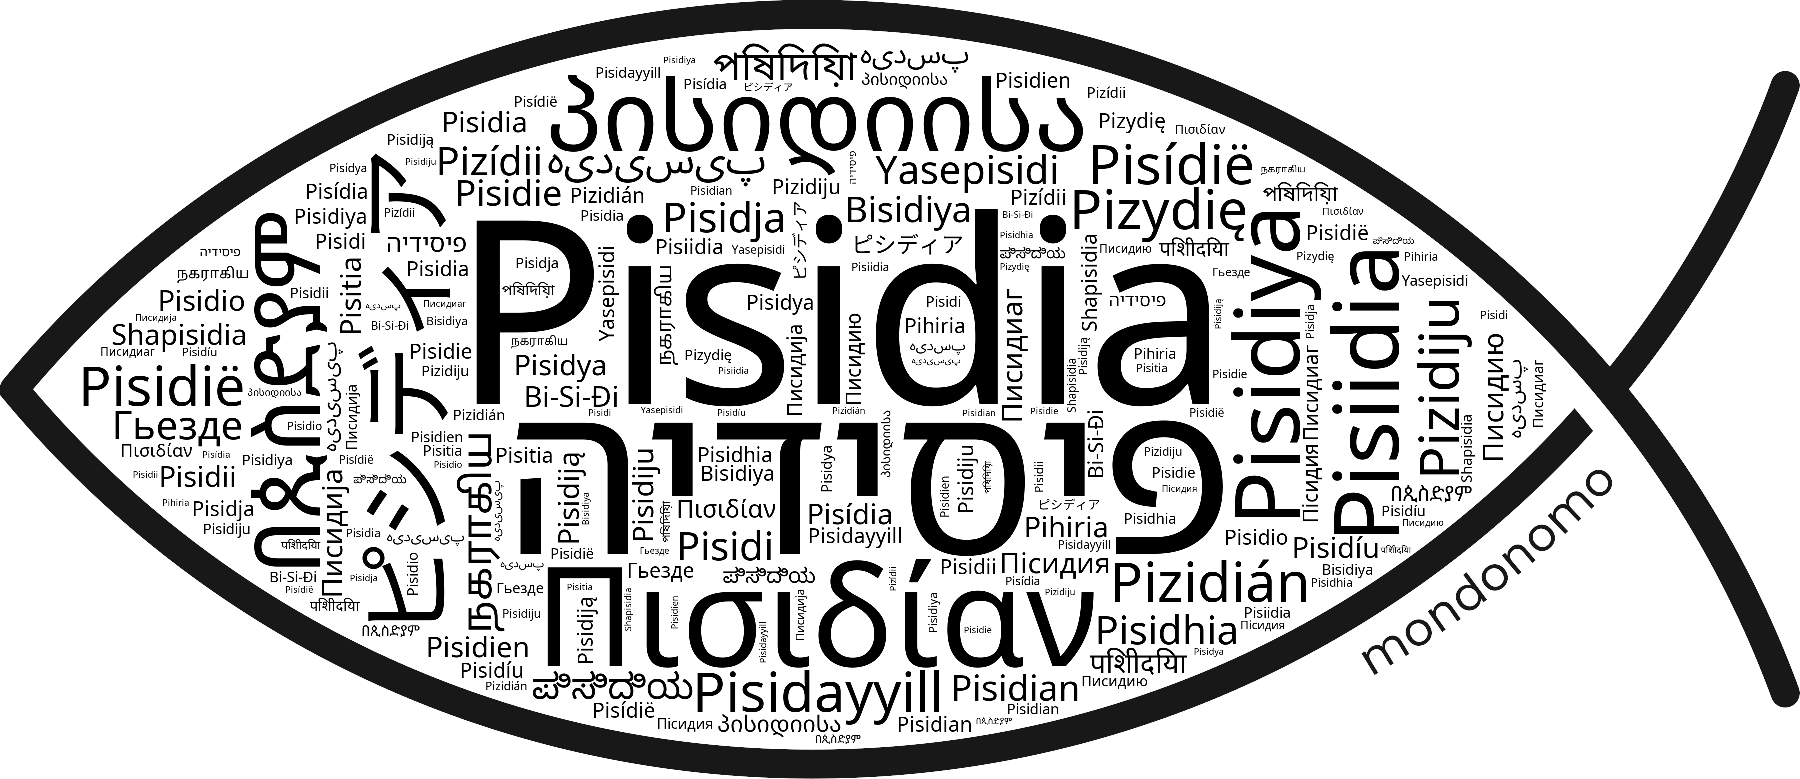 Name Pisidia in the world's Bibles